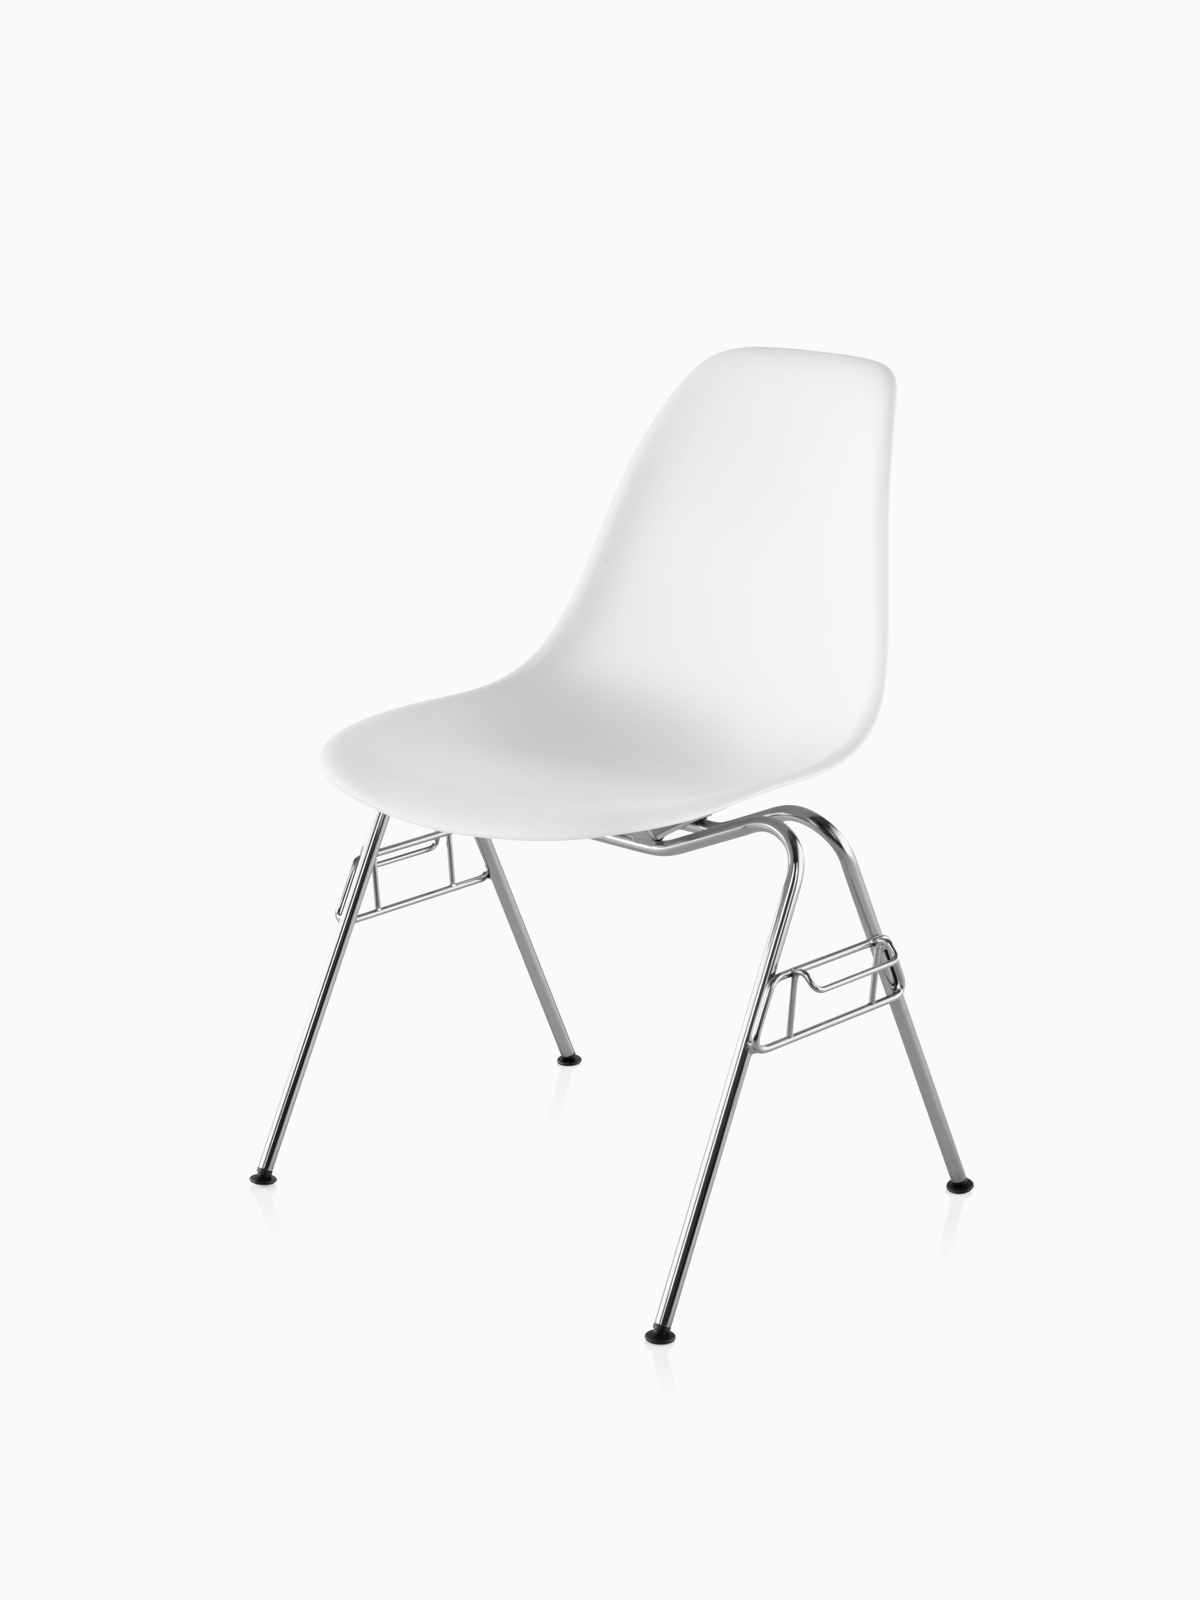 Eames Moulded Plastic Chairs